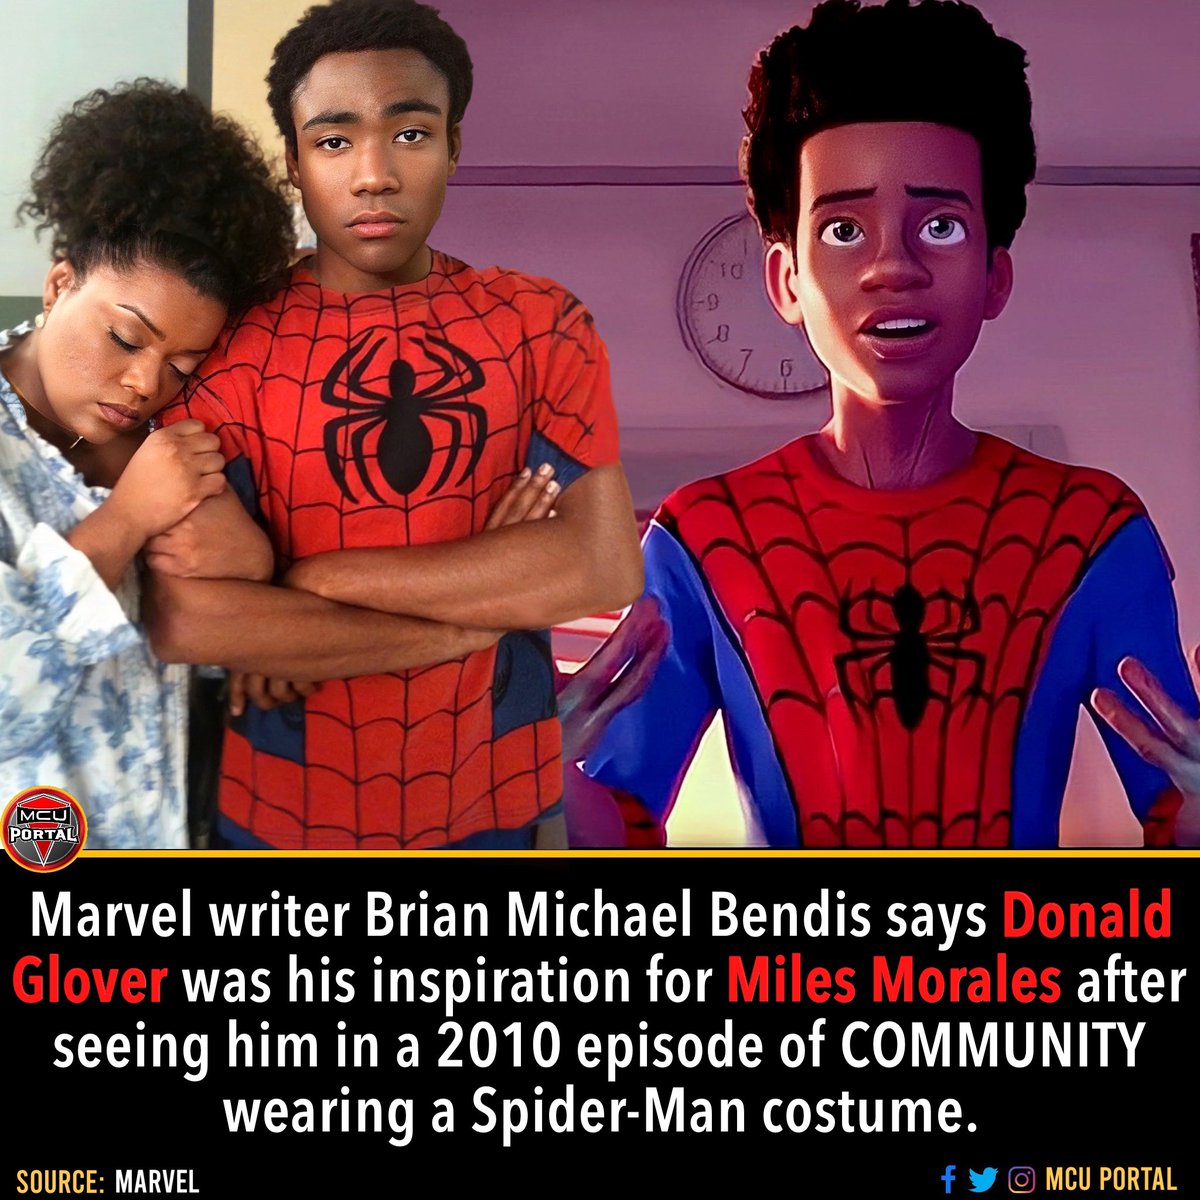 Glover also played Miles Morales in the 2015 ULTIMATE SPIDER-MAN series, was in #SpiderManHomecoming, and has had cameos in #IntoTheSpiderVerse and #AcrossTheSpiderVerse.

#sony #marvel #comics #spiderman